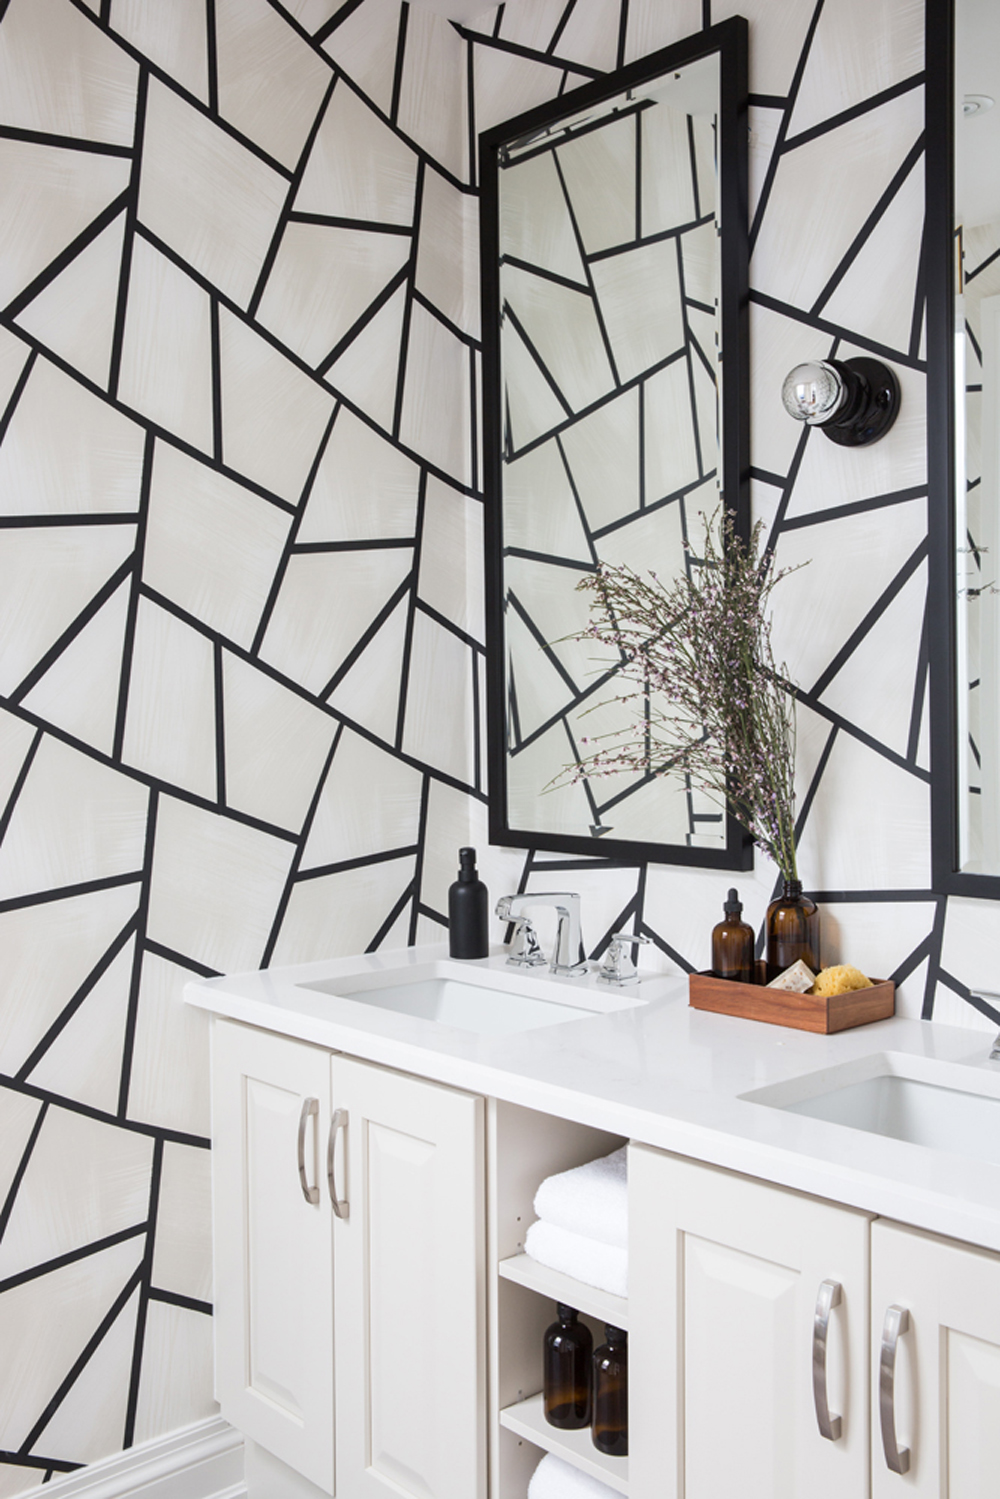 A small white bathroom a funky black wall pattern and some greenery